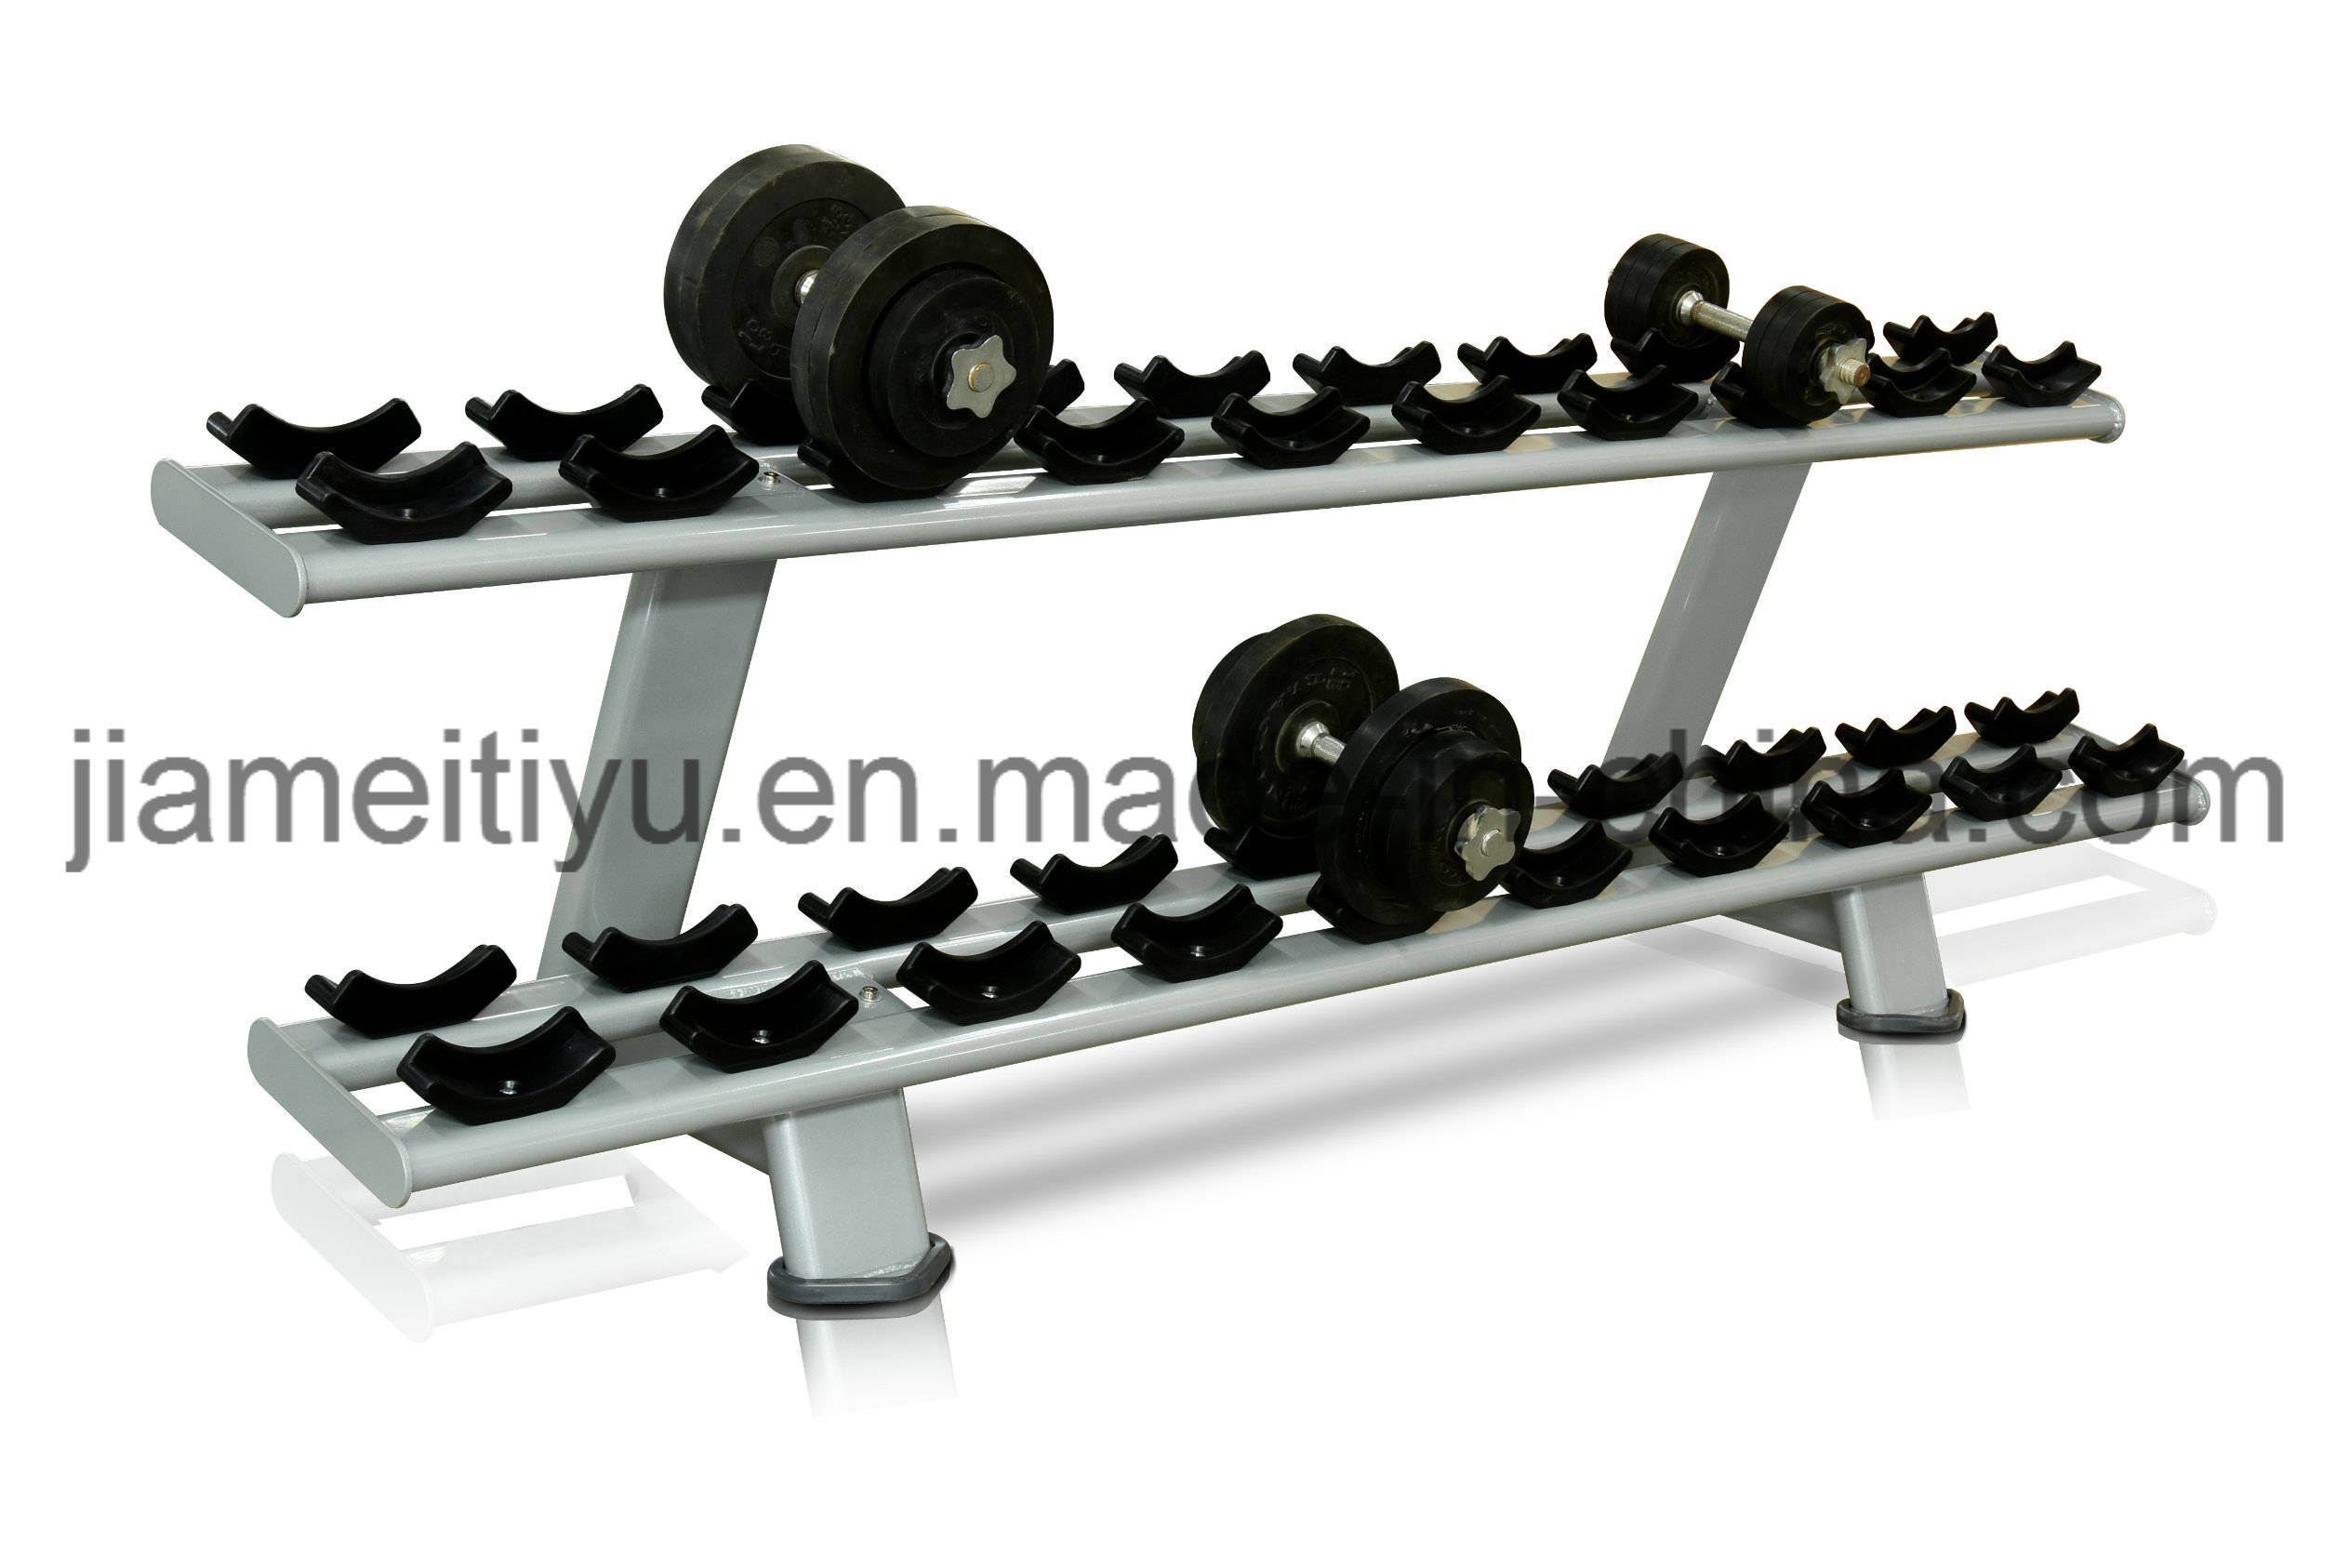 /proimages/2f0j00gKwQfuOhabpa/commercial-gs-gym-equipment-10-pairs-twin-tier-dumbbell-rack.jpg